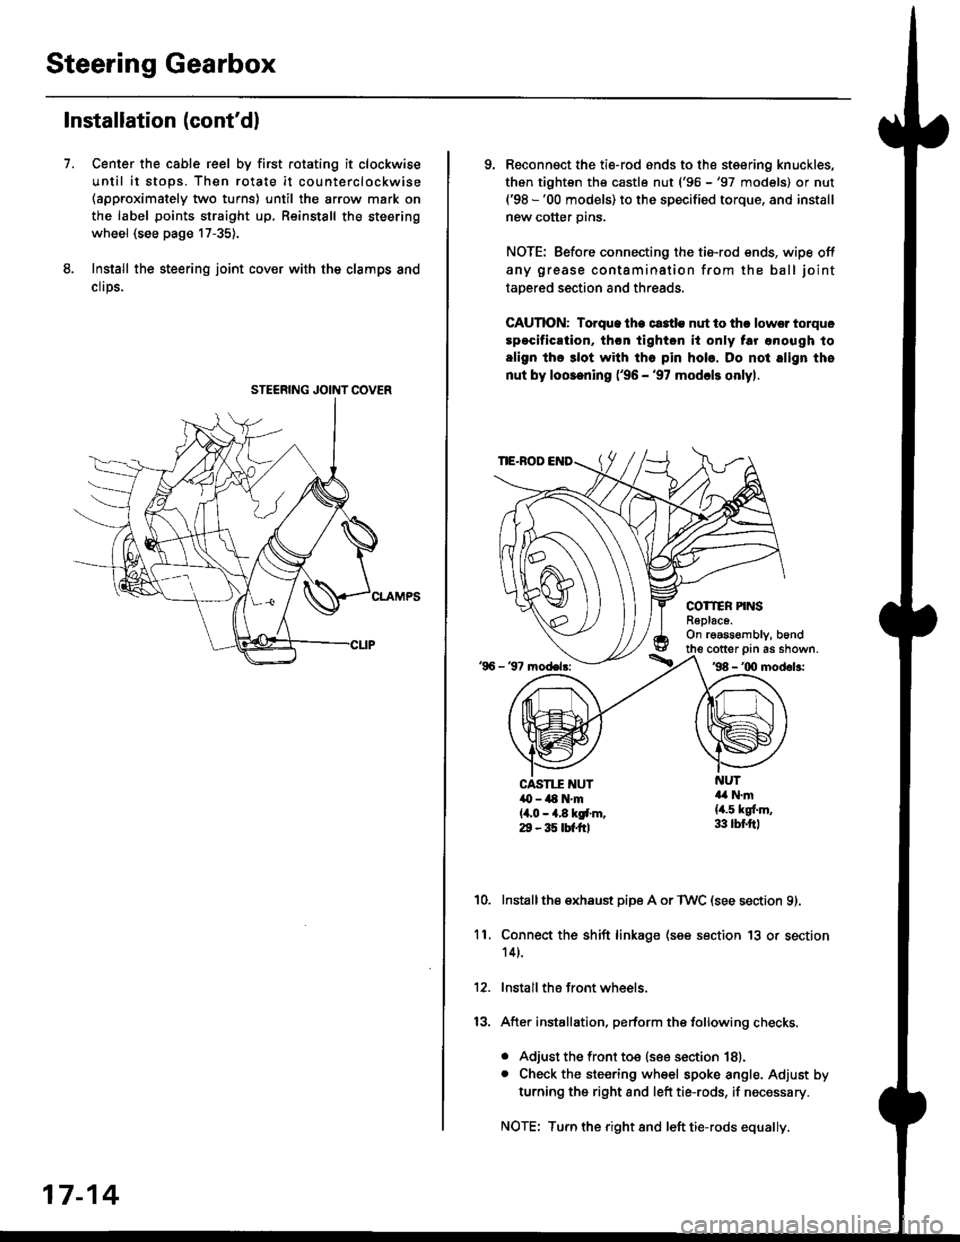 HONDA CIVIC 1999 6.G Workshop Manual Steering Gearbox
Installation (contdl
Center the cable reel by first rotating it clockwise
until it stops. Then rotate it counterclockwise(approximately two turns) until the arrow mark on
the label p